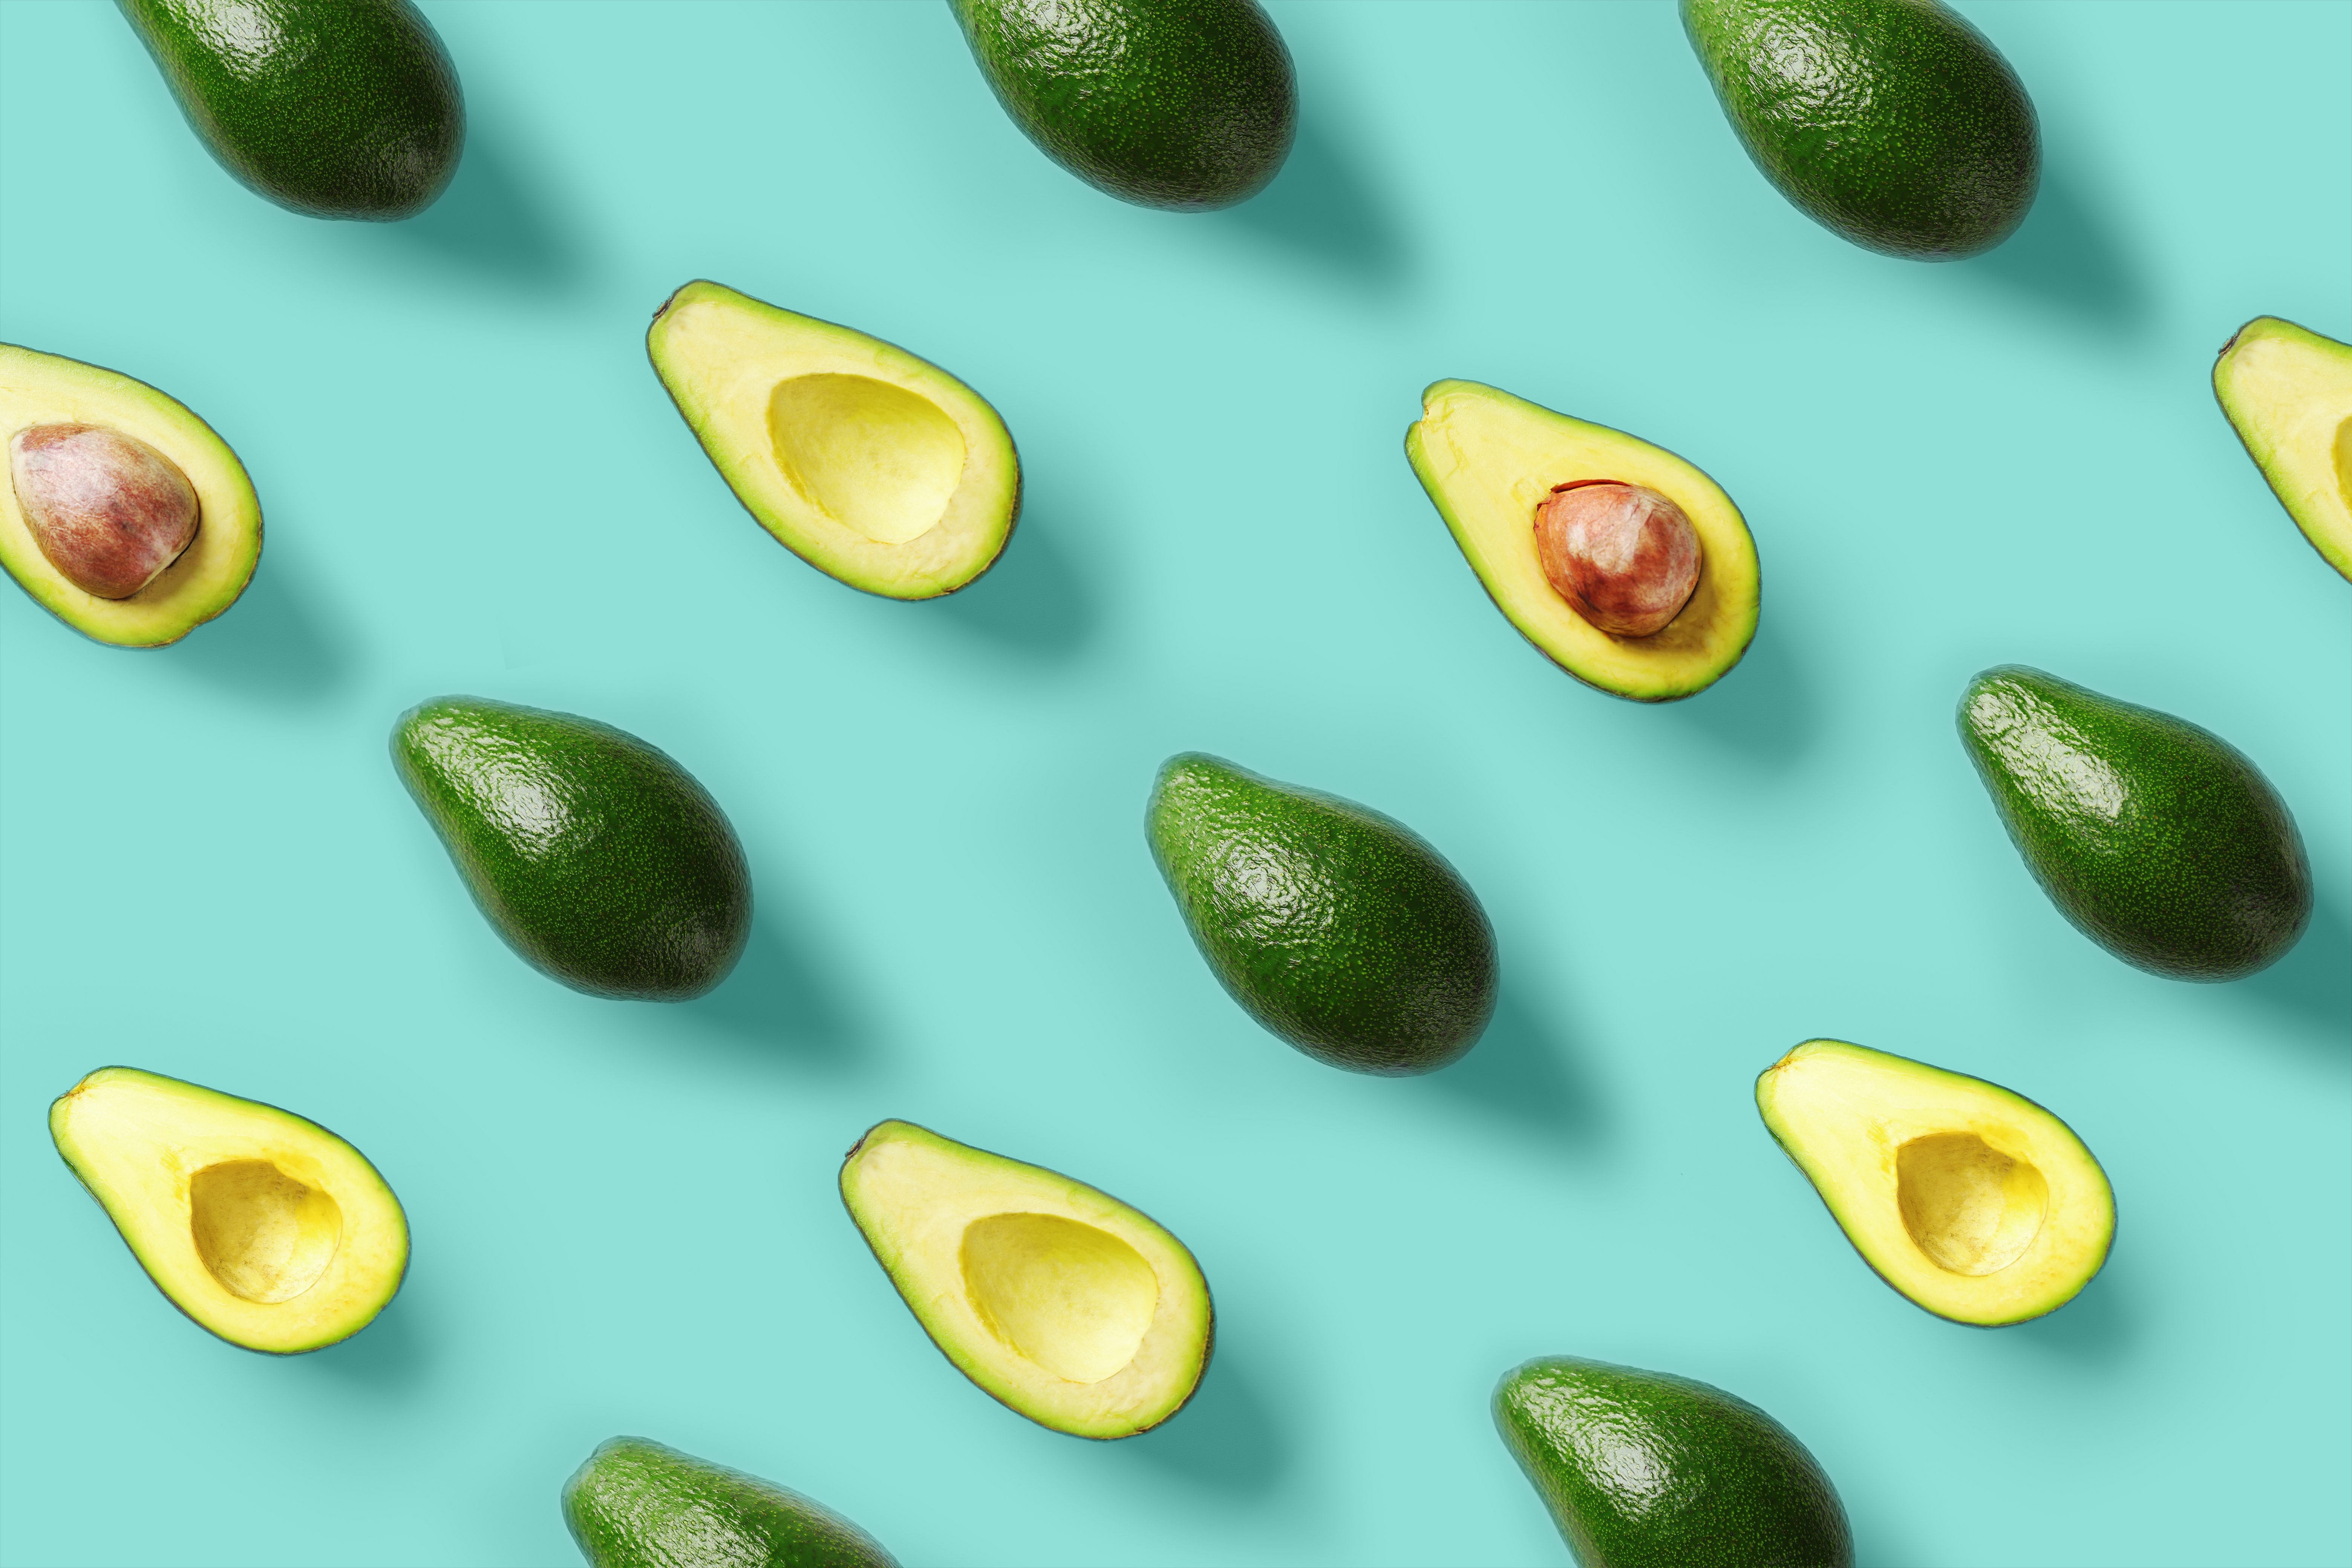 Could Avocados Be the Key to Weight Loss?